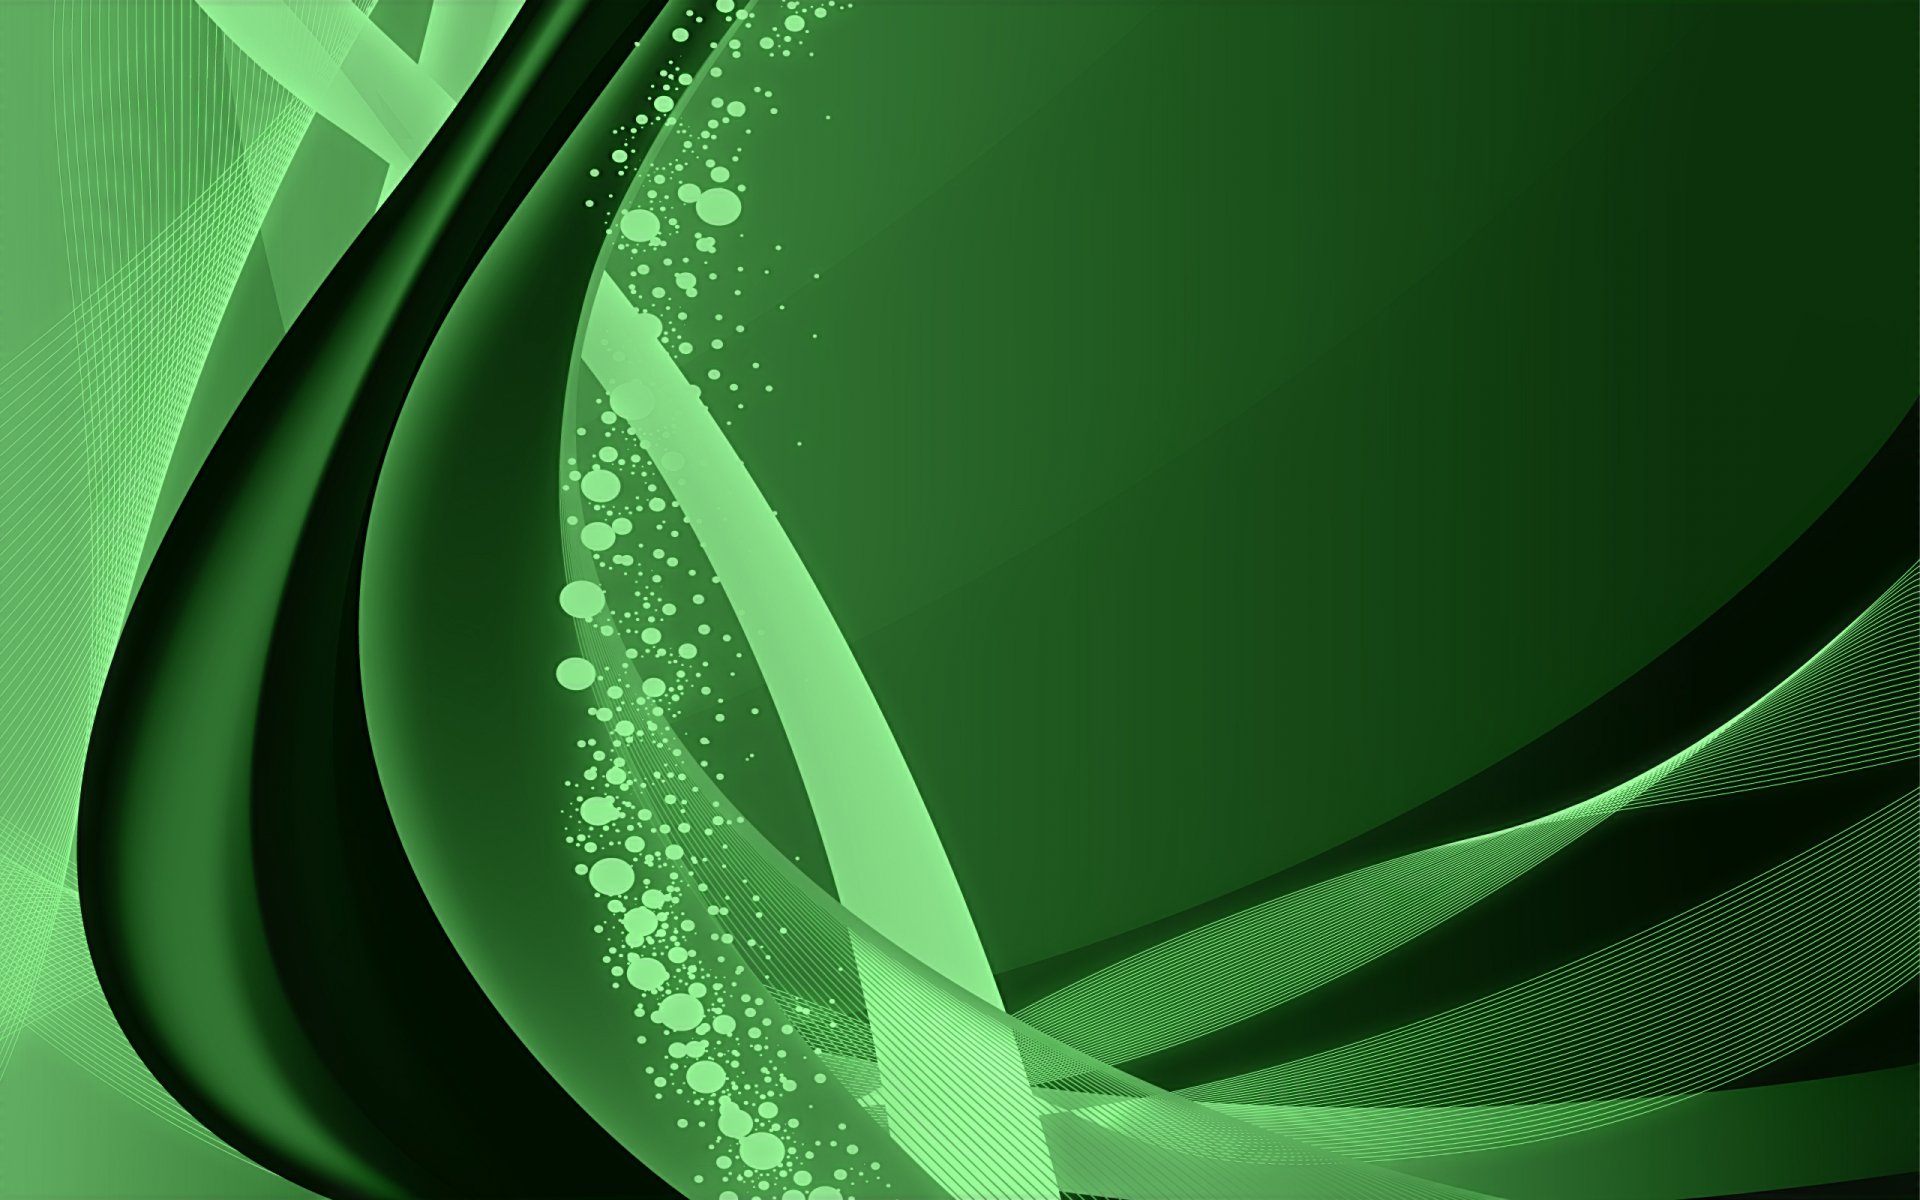 Green Background Hd Images - IMAGESEE